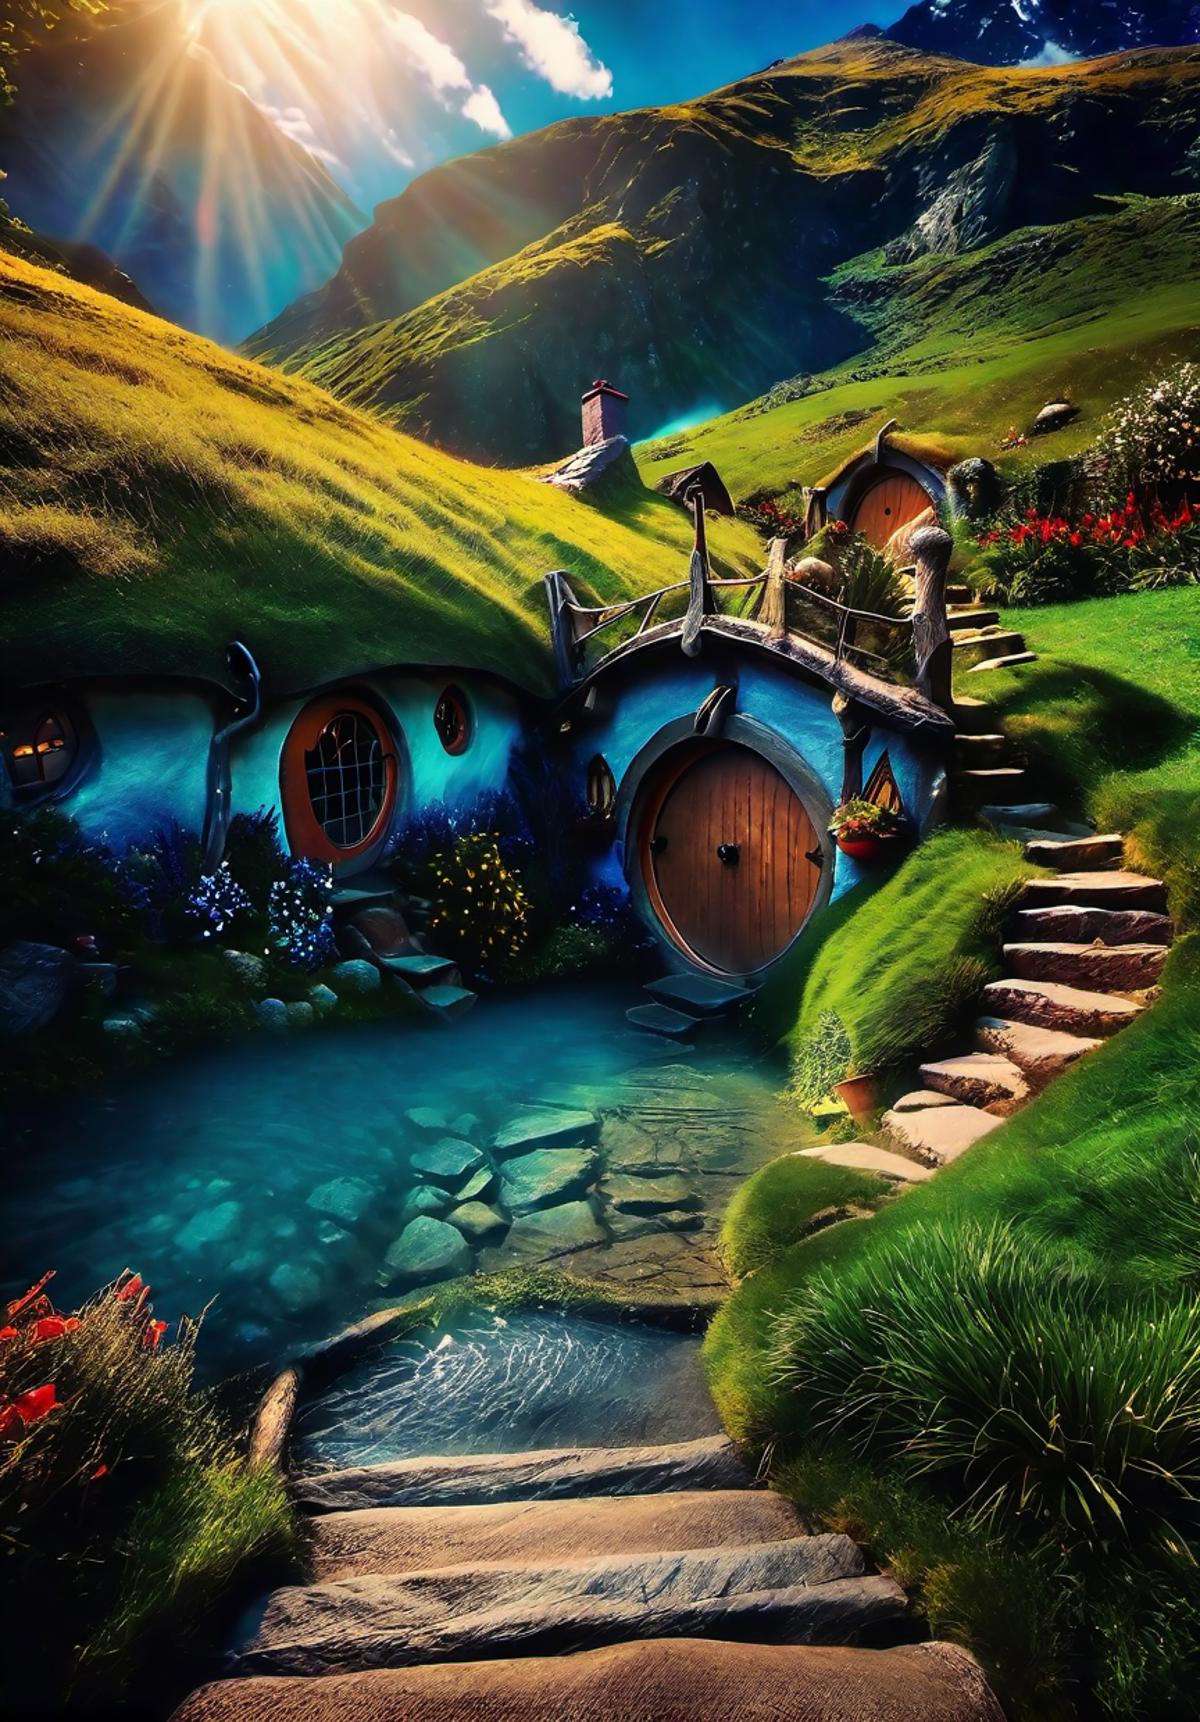 A Hobbit Hole with a Blue Door and Stairs in a Grassy Area